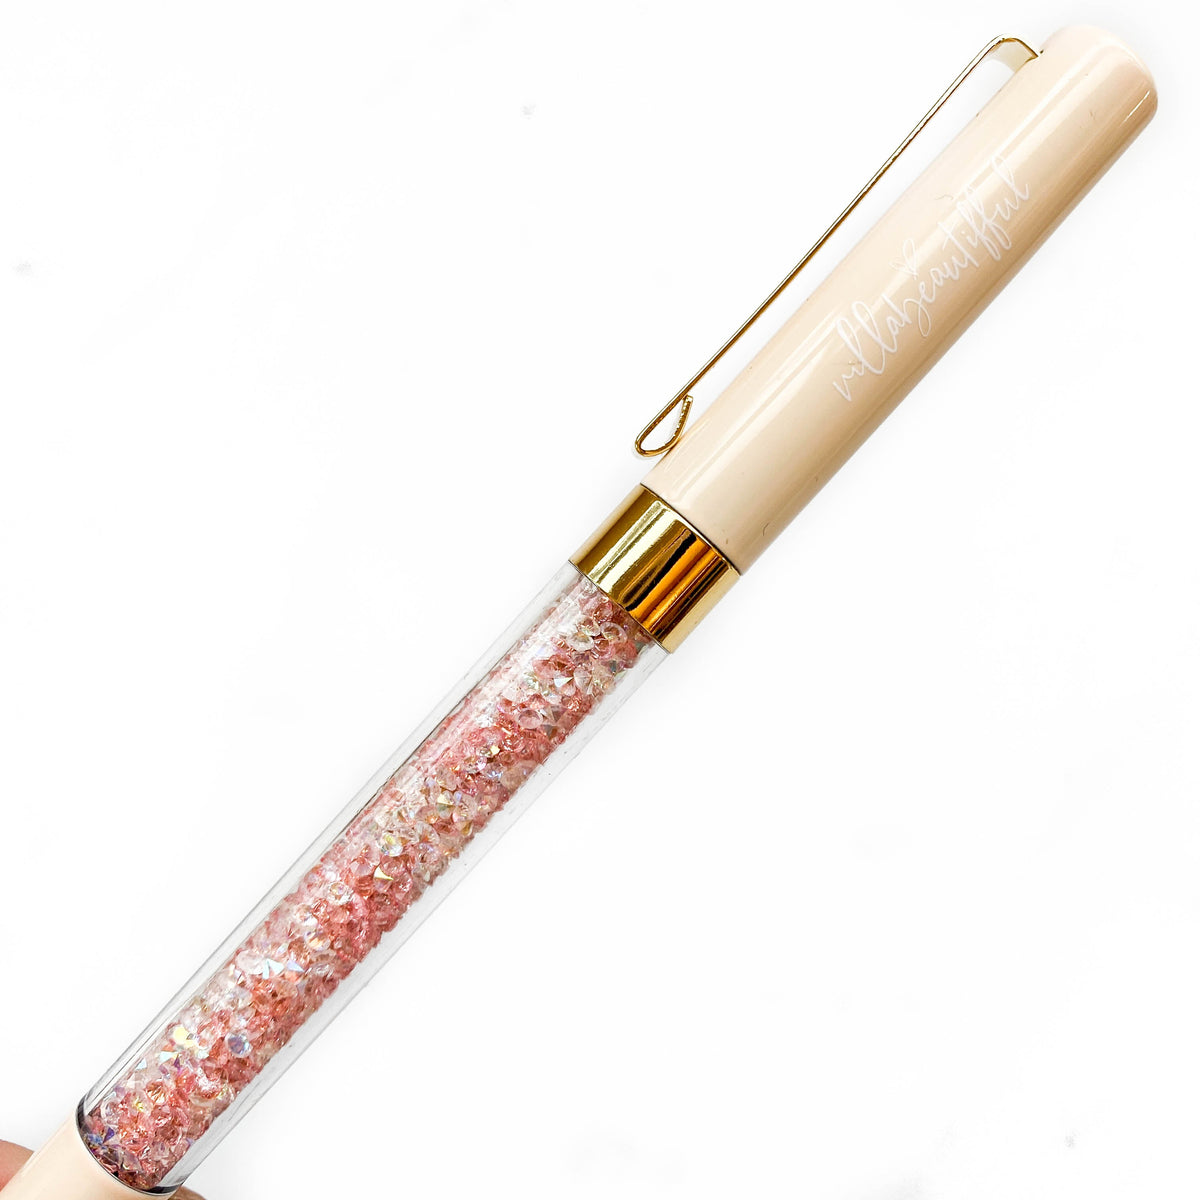 Cafe Papershire Imperfect Crystal VBPen | limited kit pen